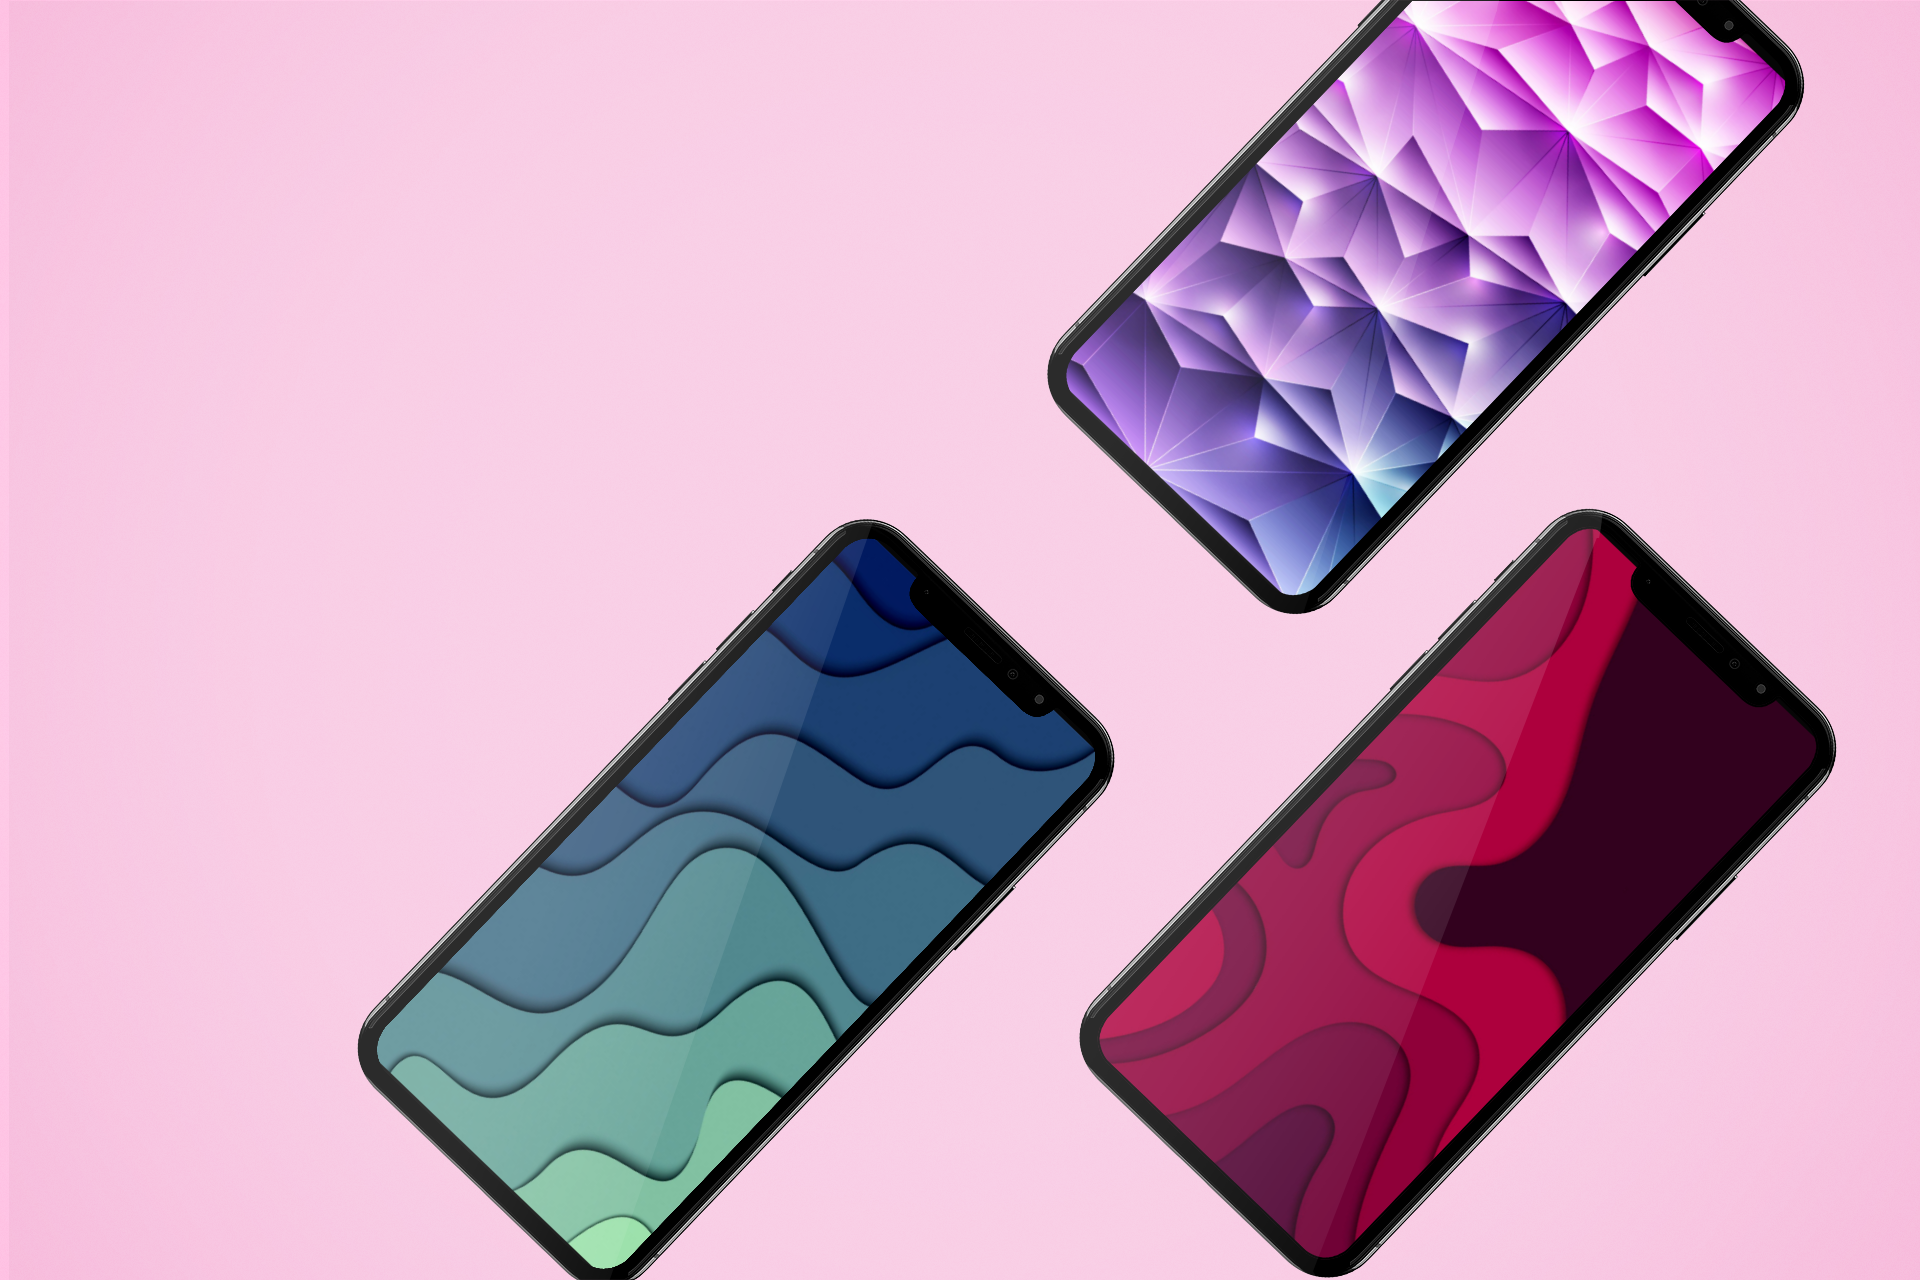 Abstract Geometric iPhone Wallpaper Pack